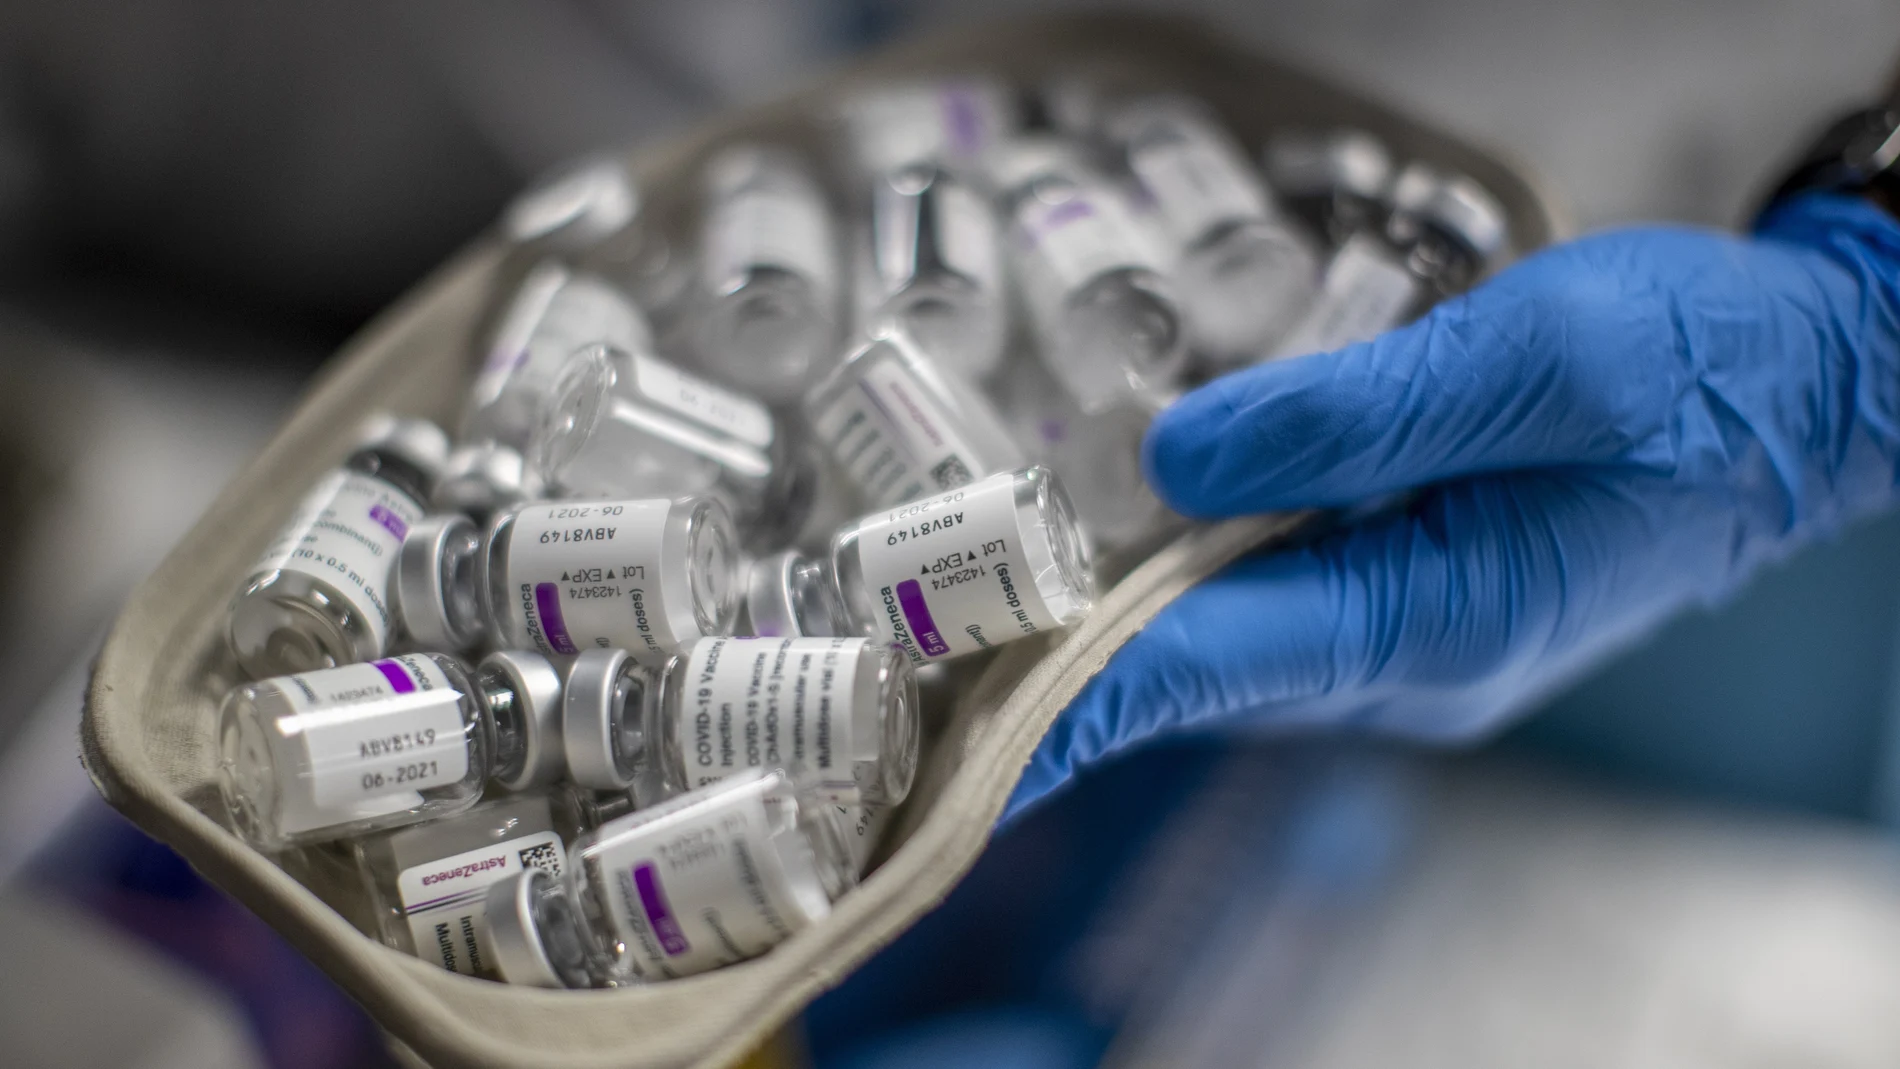 A nurse holds vials of AstraZeneca vaccine against COVID-19 during a vaccination campaign at WiZink indoor arena in Madrid, Spain, Friday, April 9, 2021. Madrid is expanding its mass COVID-19 vaccination program, with jabs being administered from Friday at the city's large WiZink indoor arena. Some 4,000 people between 60 and 65 years of age were due to receive the AstraZeneca vaccine there on the first day. (AP Photo/Manu Fernandez)